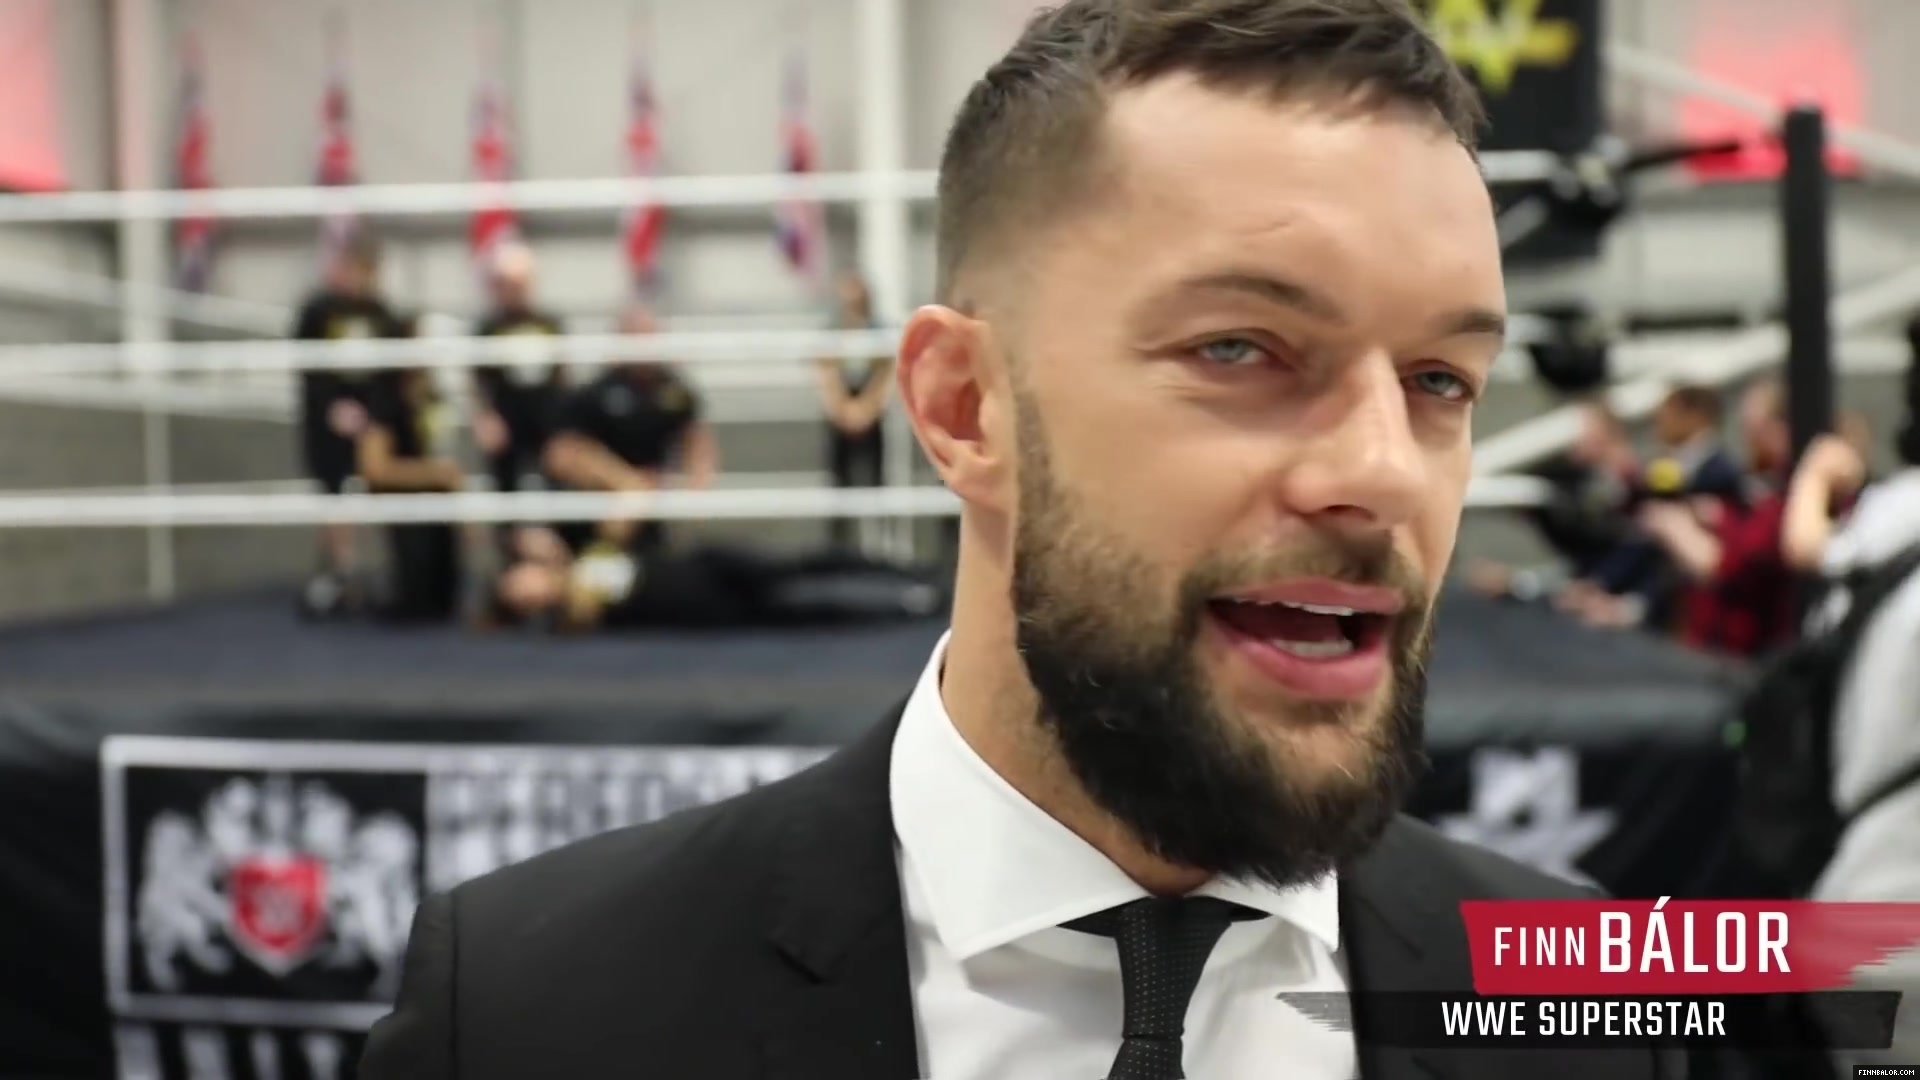 WWE_Superstar_FINN_BALOR_joins_MOUSTACHE_MOUNTAIN_at_the_opening_of_the_NXT_UK_PC_054.jpg